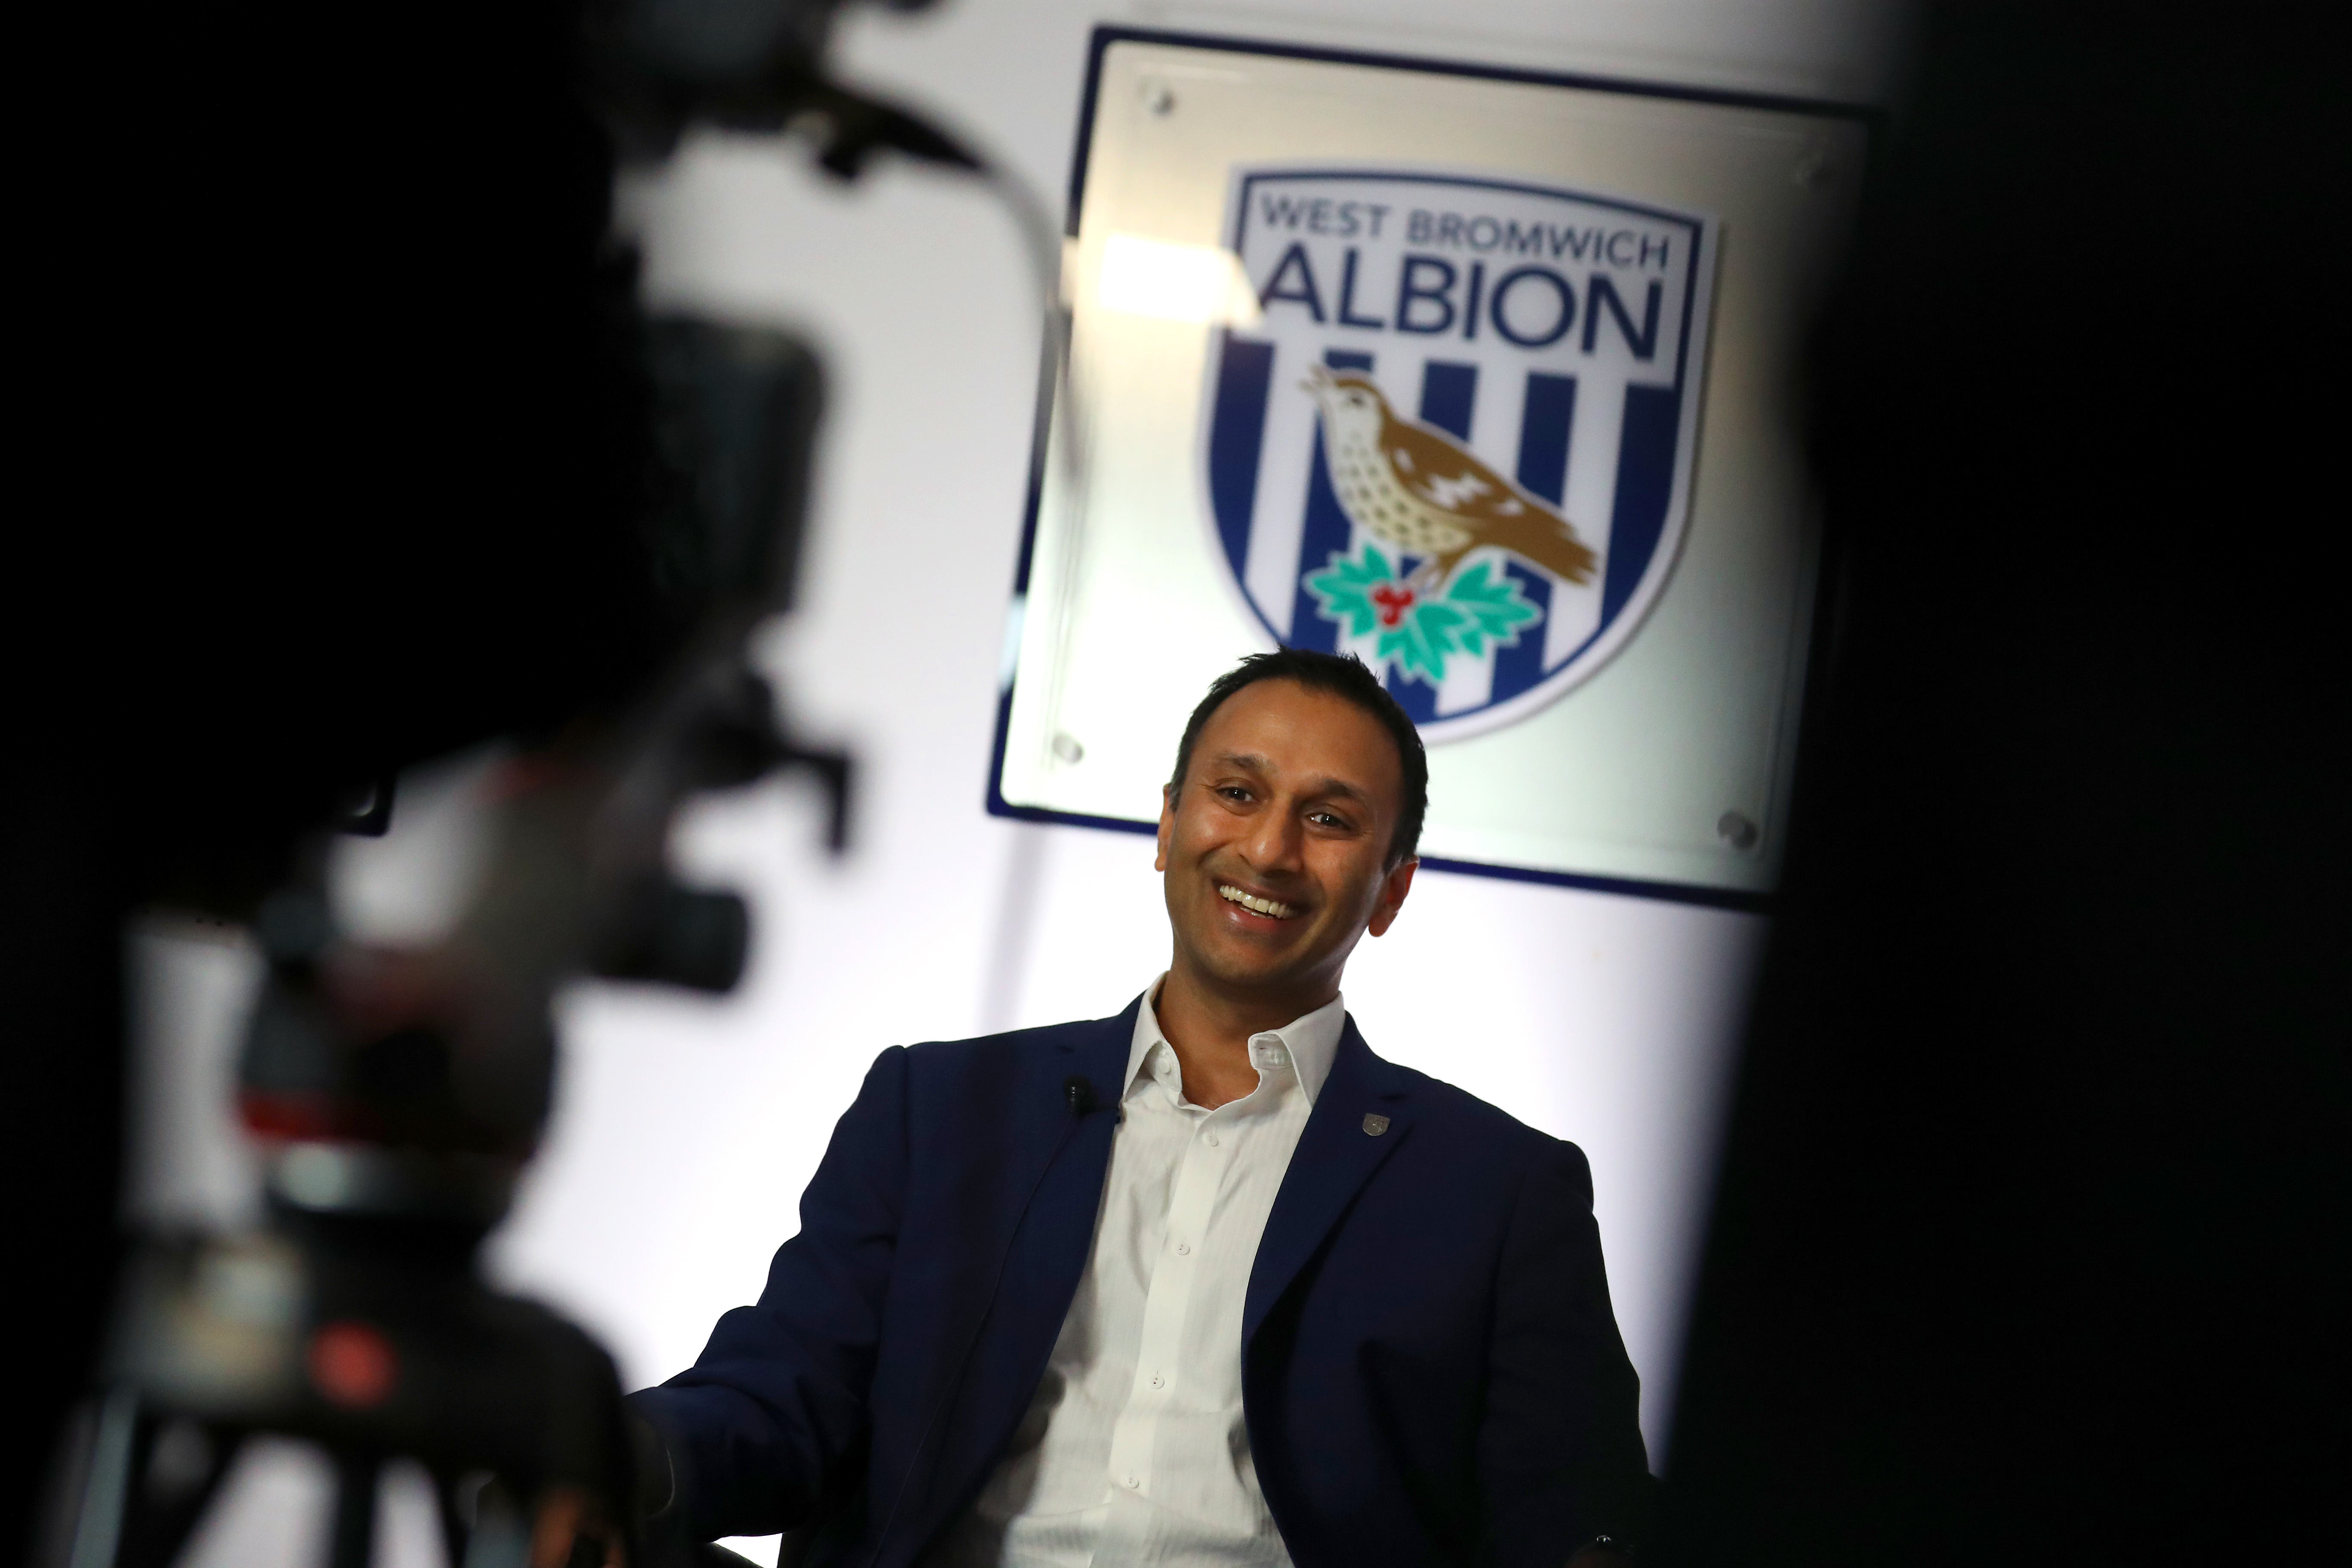 Shilen Patel is interviewed in front of a big Albion badge 